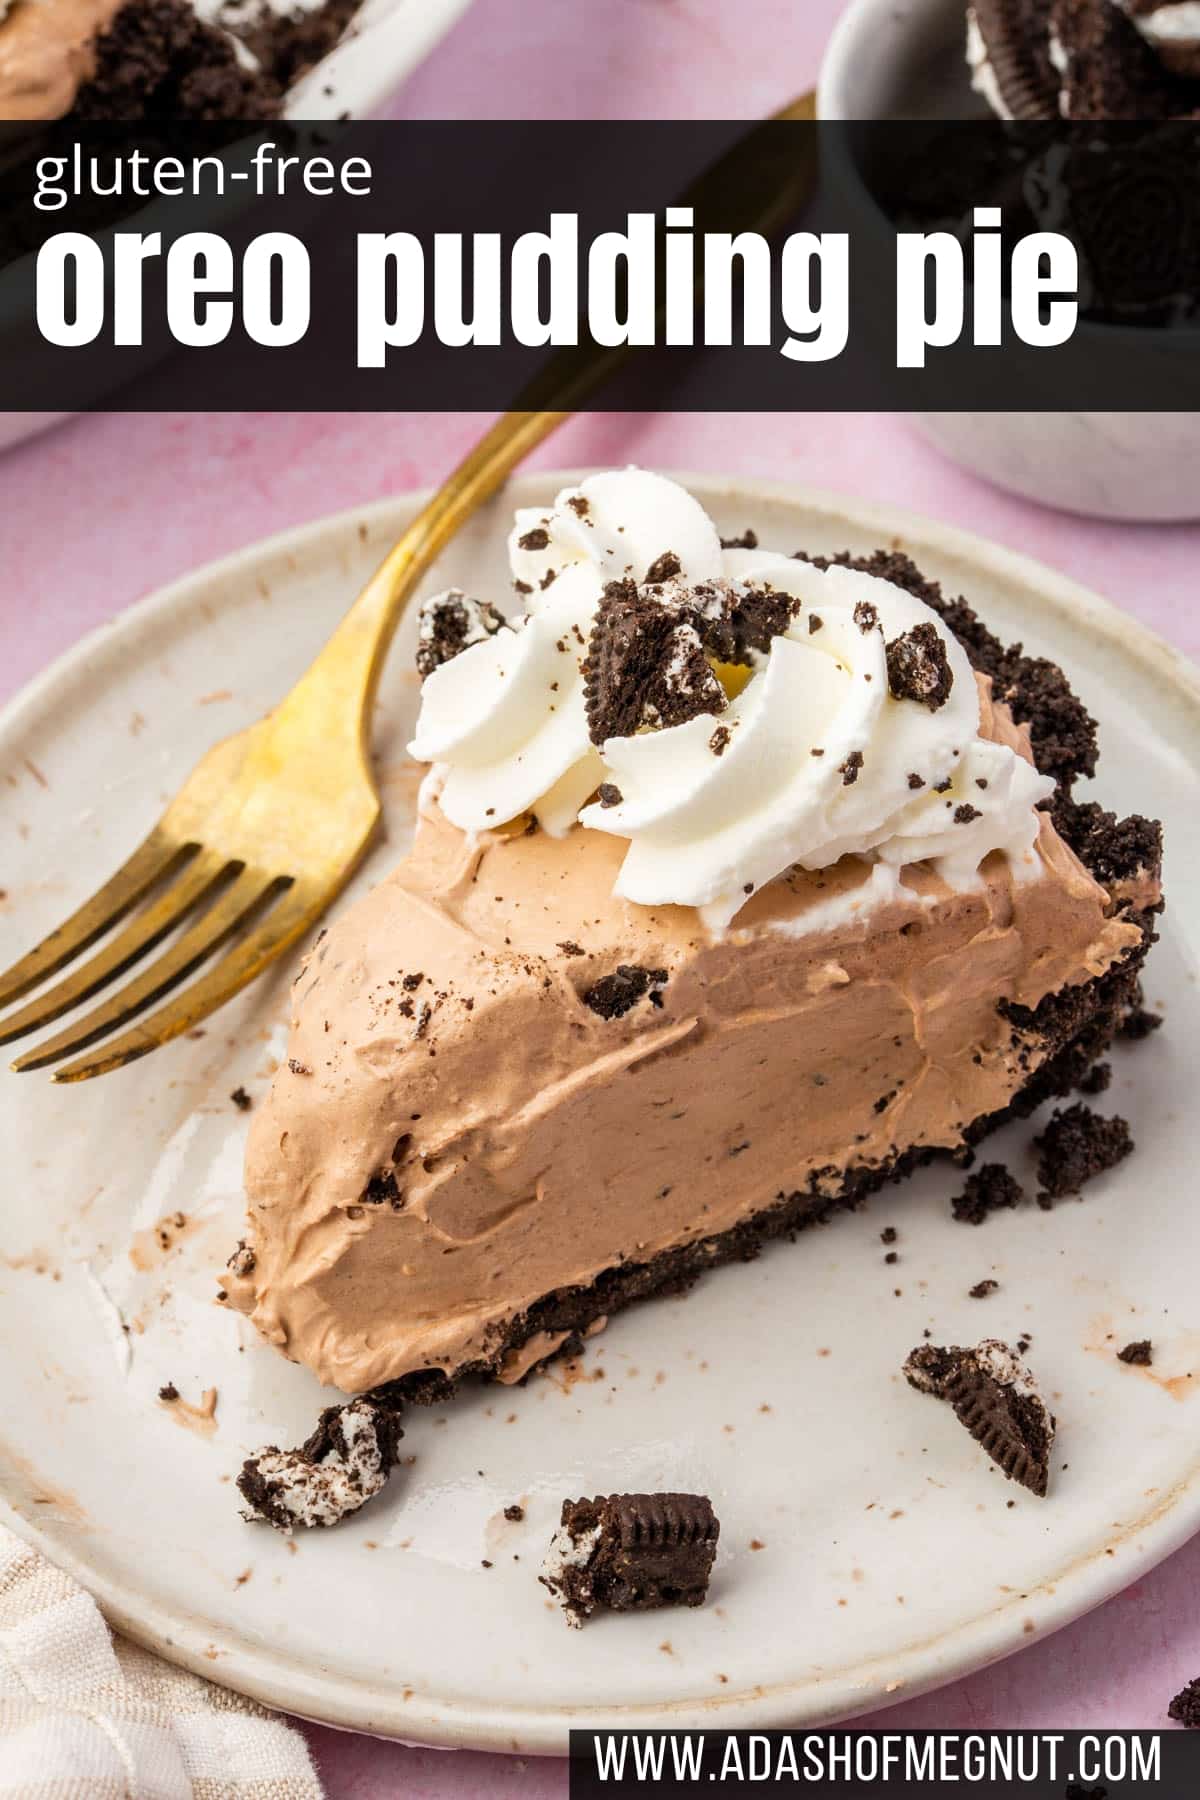 A slice of Oreo pudding pie with an Oreo crust on a dessert plate with a gold fork.